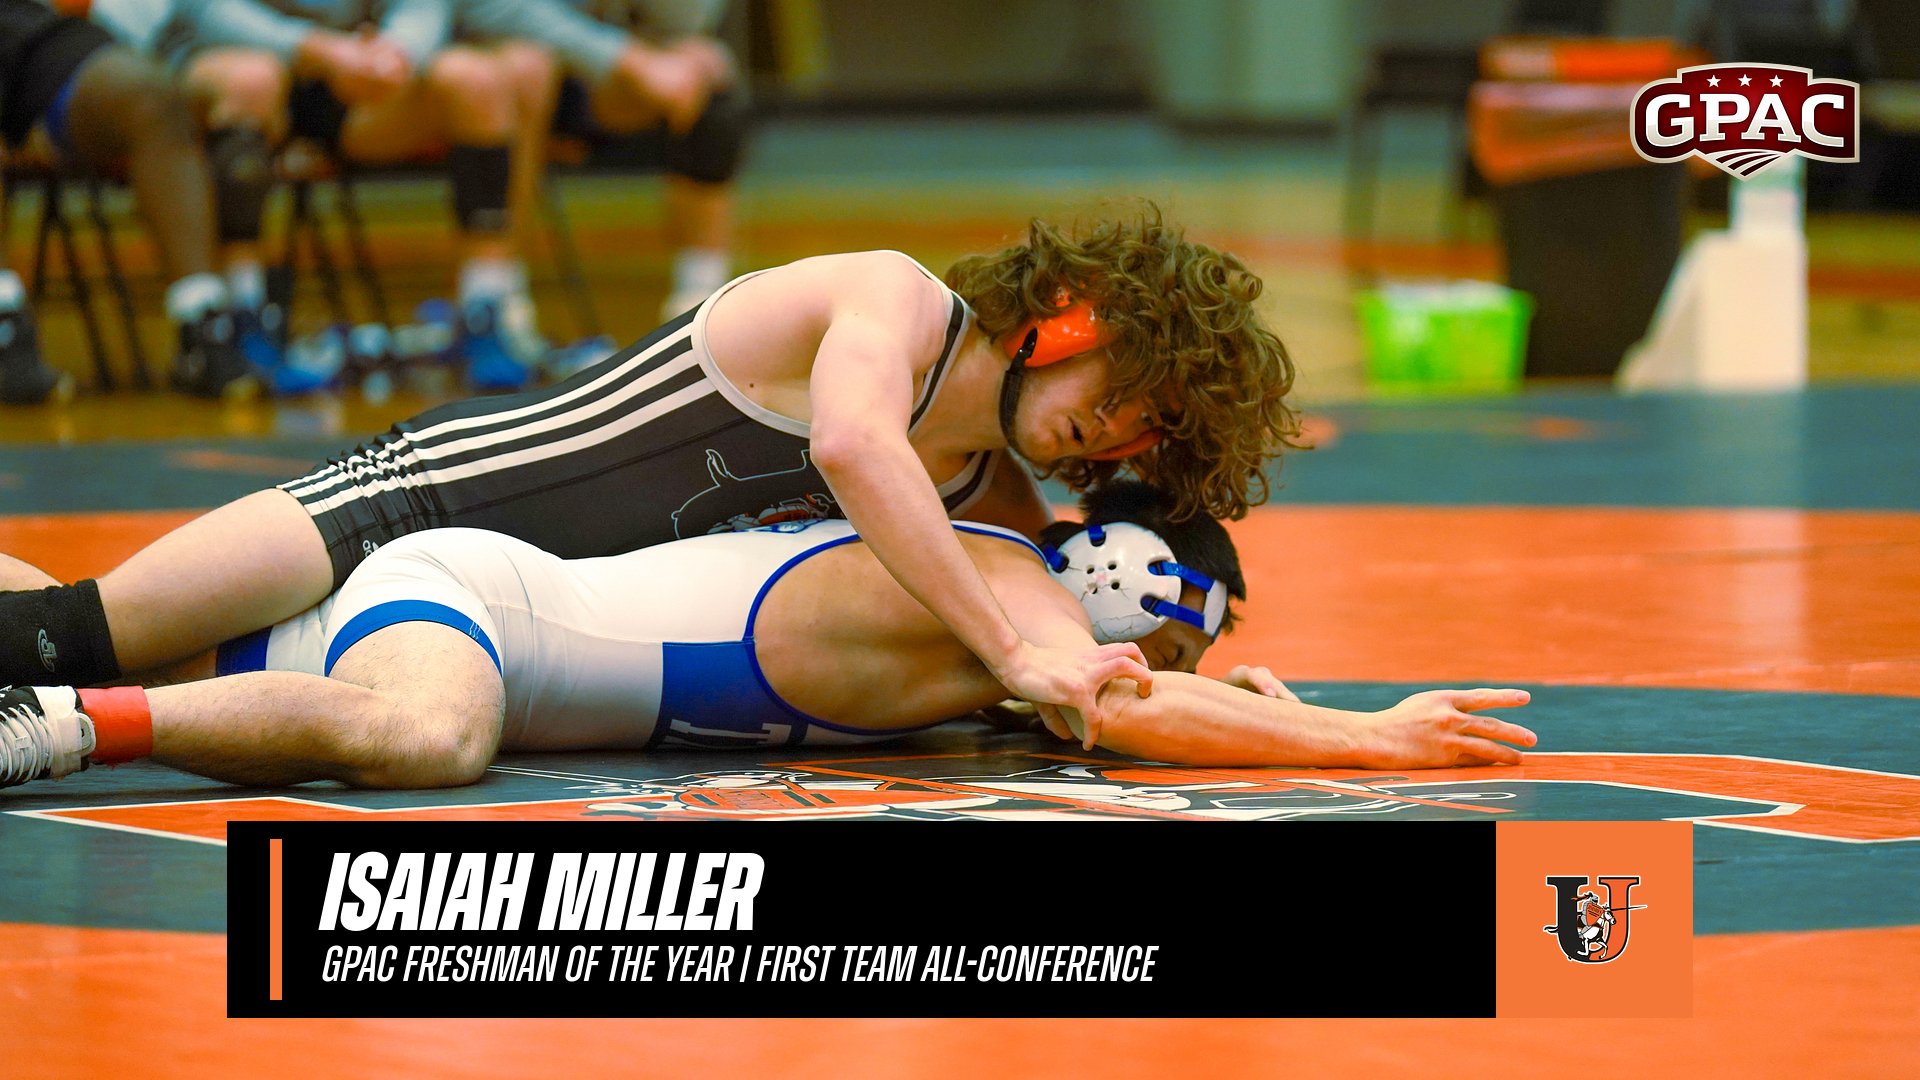 Isaiah Miller named GPAC Freshman of the Year, 1st Team All-Conference